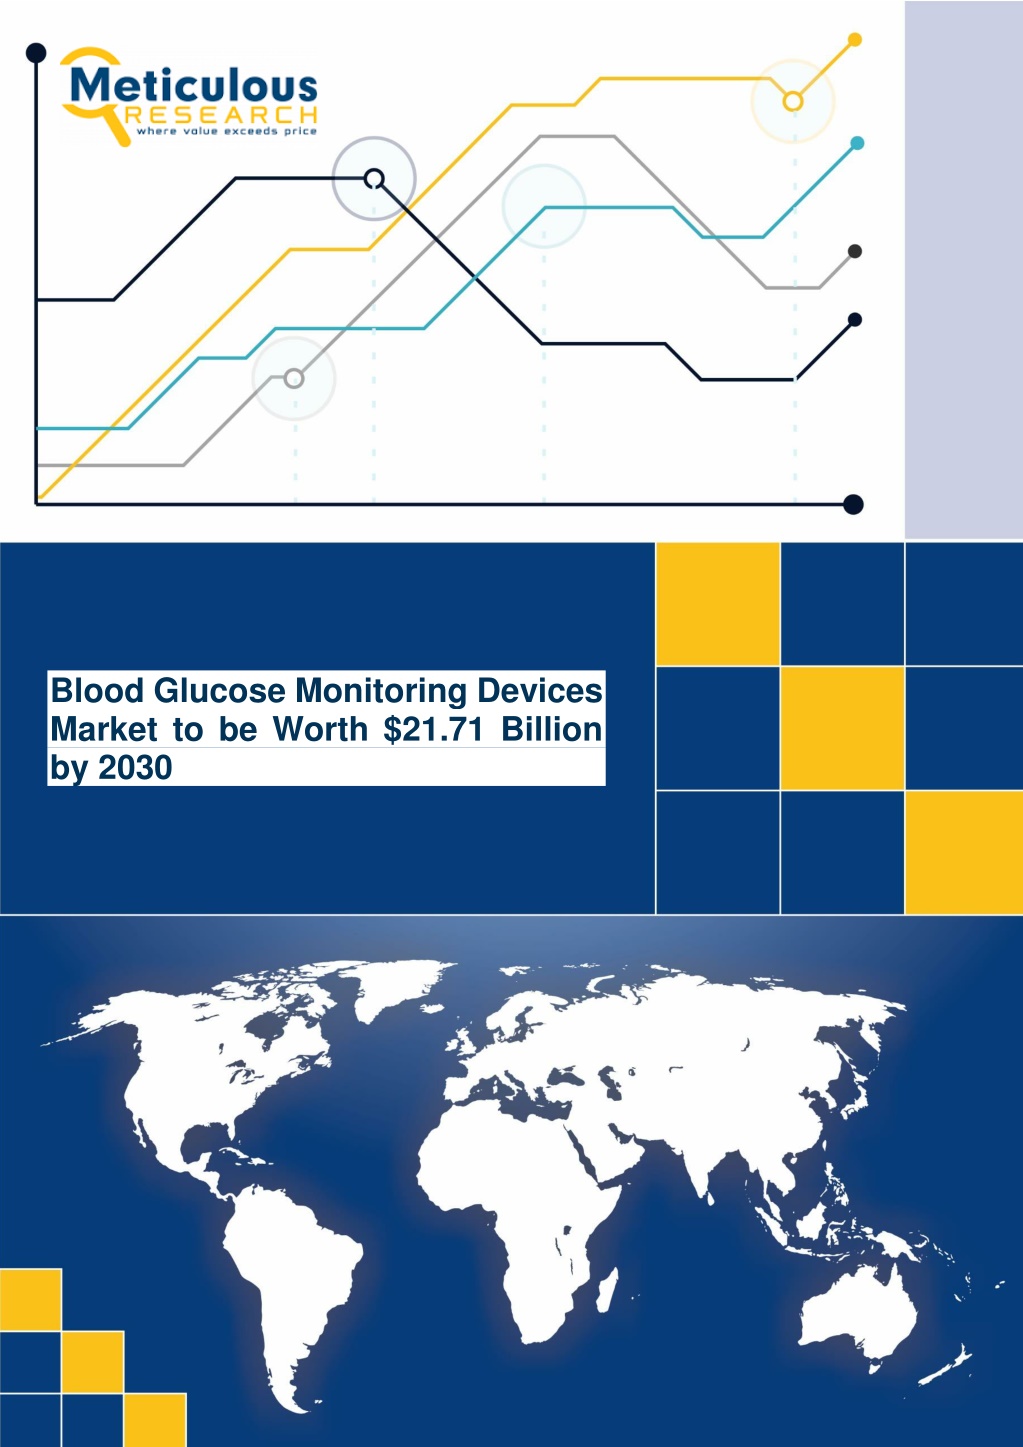 blood glucose monitoring devices market l.w